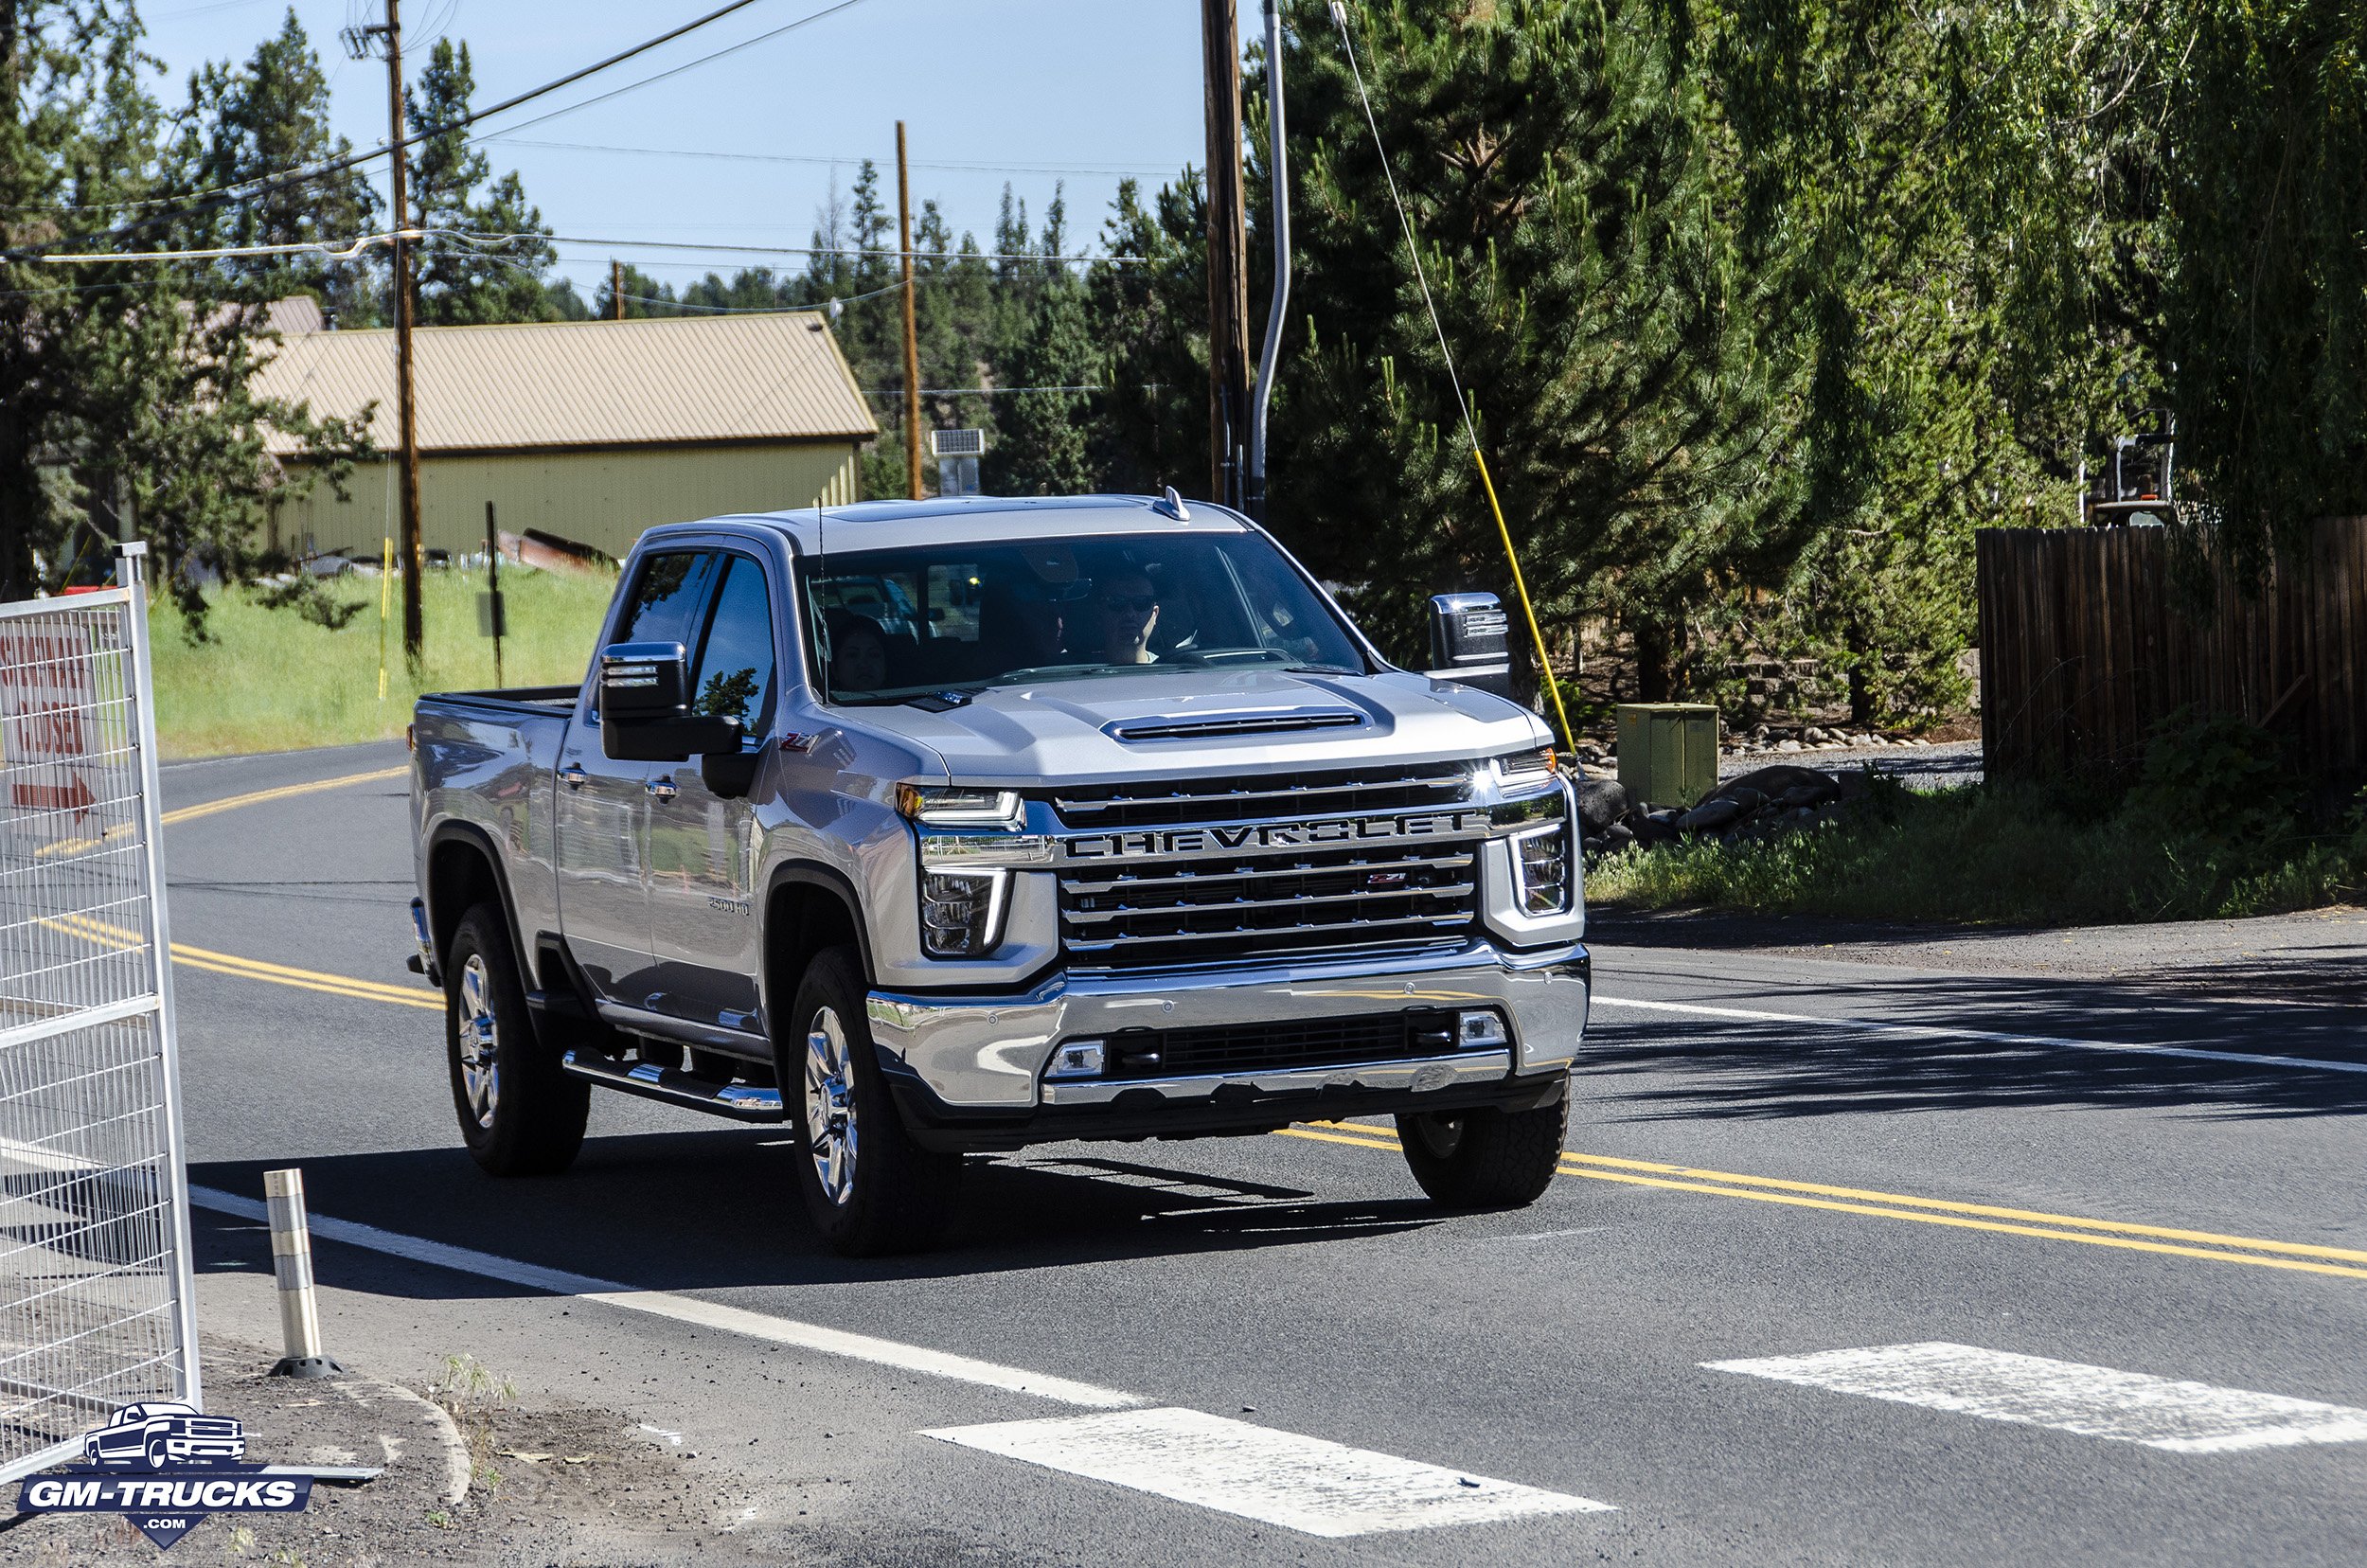 First Drive - 2020 Silverado HD - What’s Towing Got To Do With Heavy Duty Trucks? Everything!